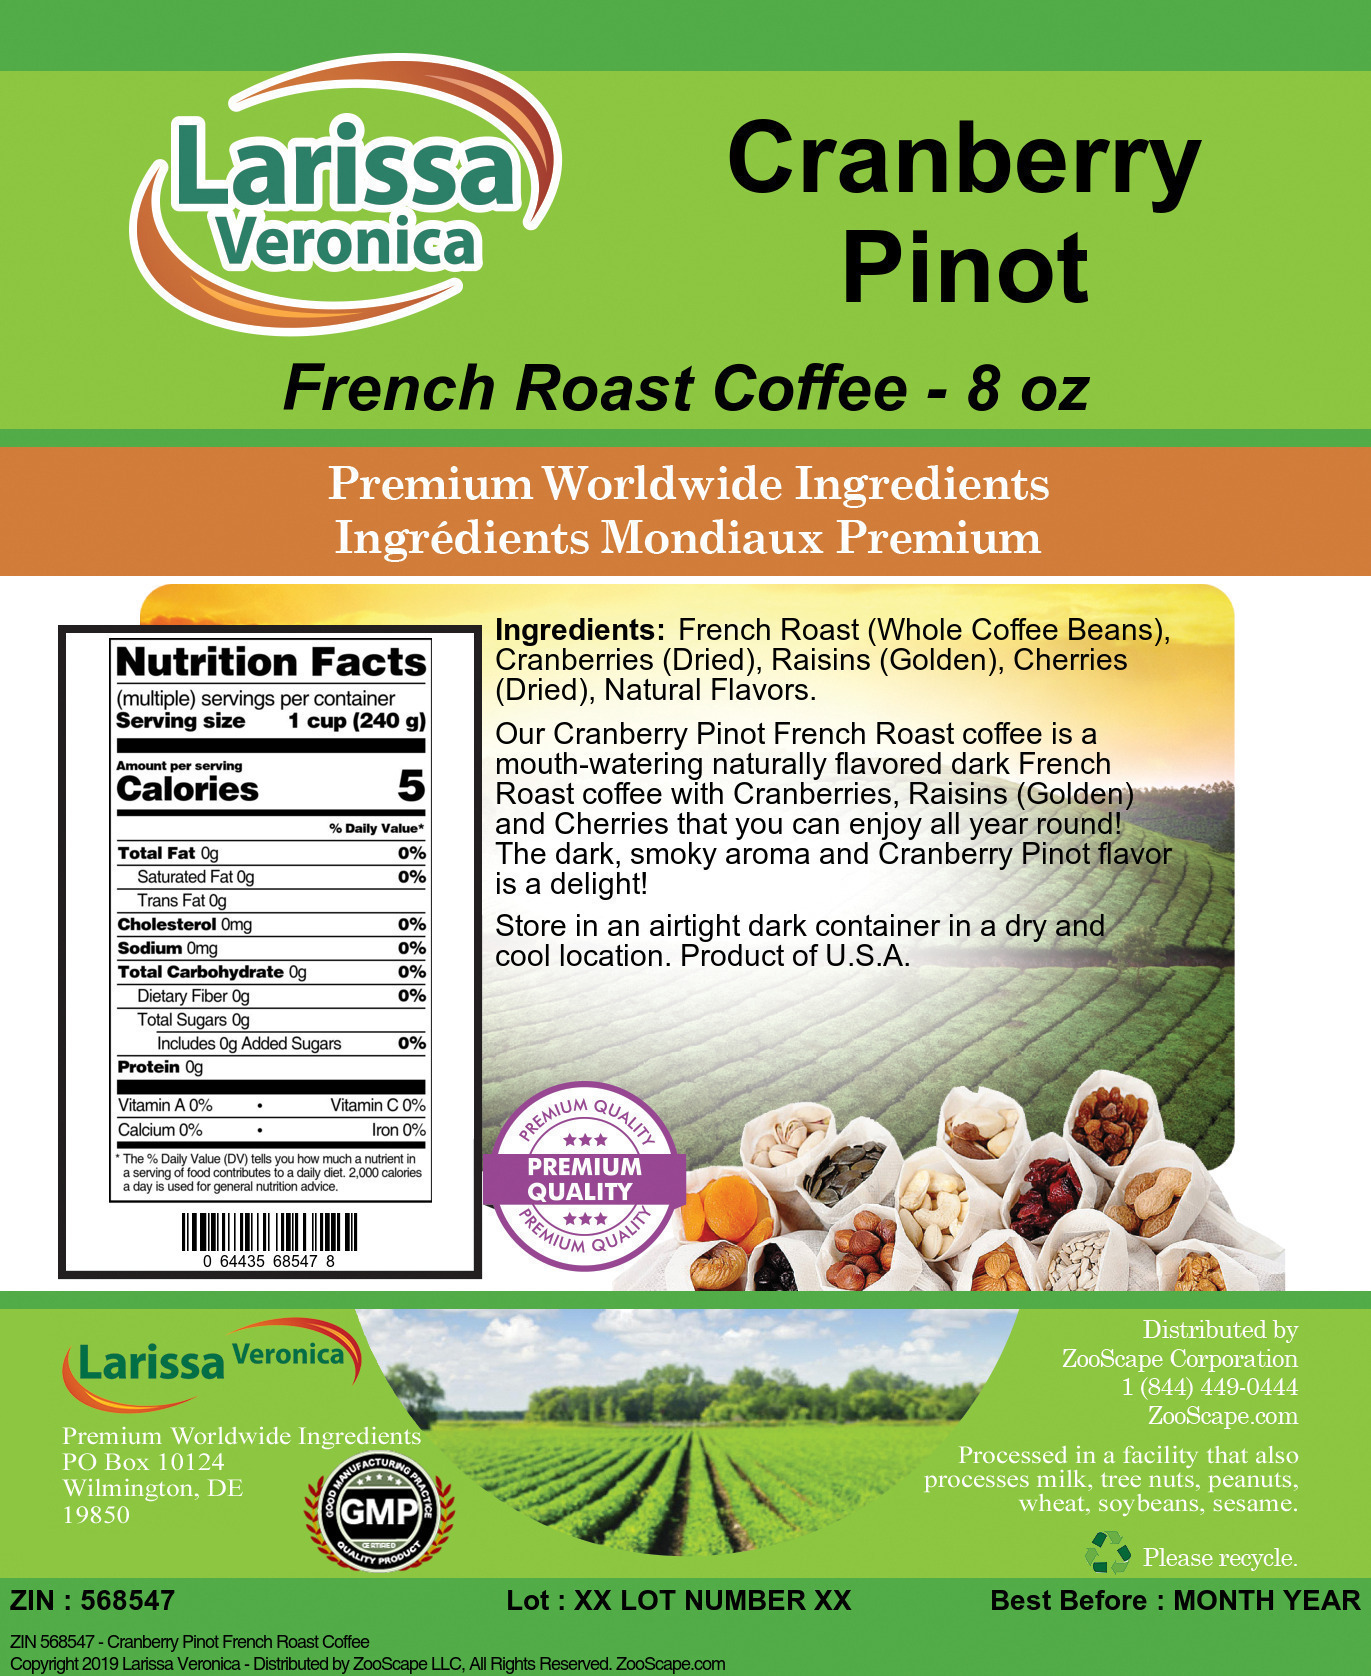 Cranberry Pinot French Roast Coffee - Label